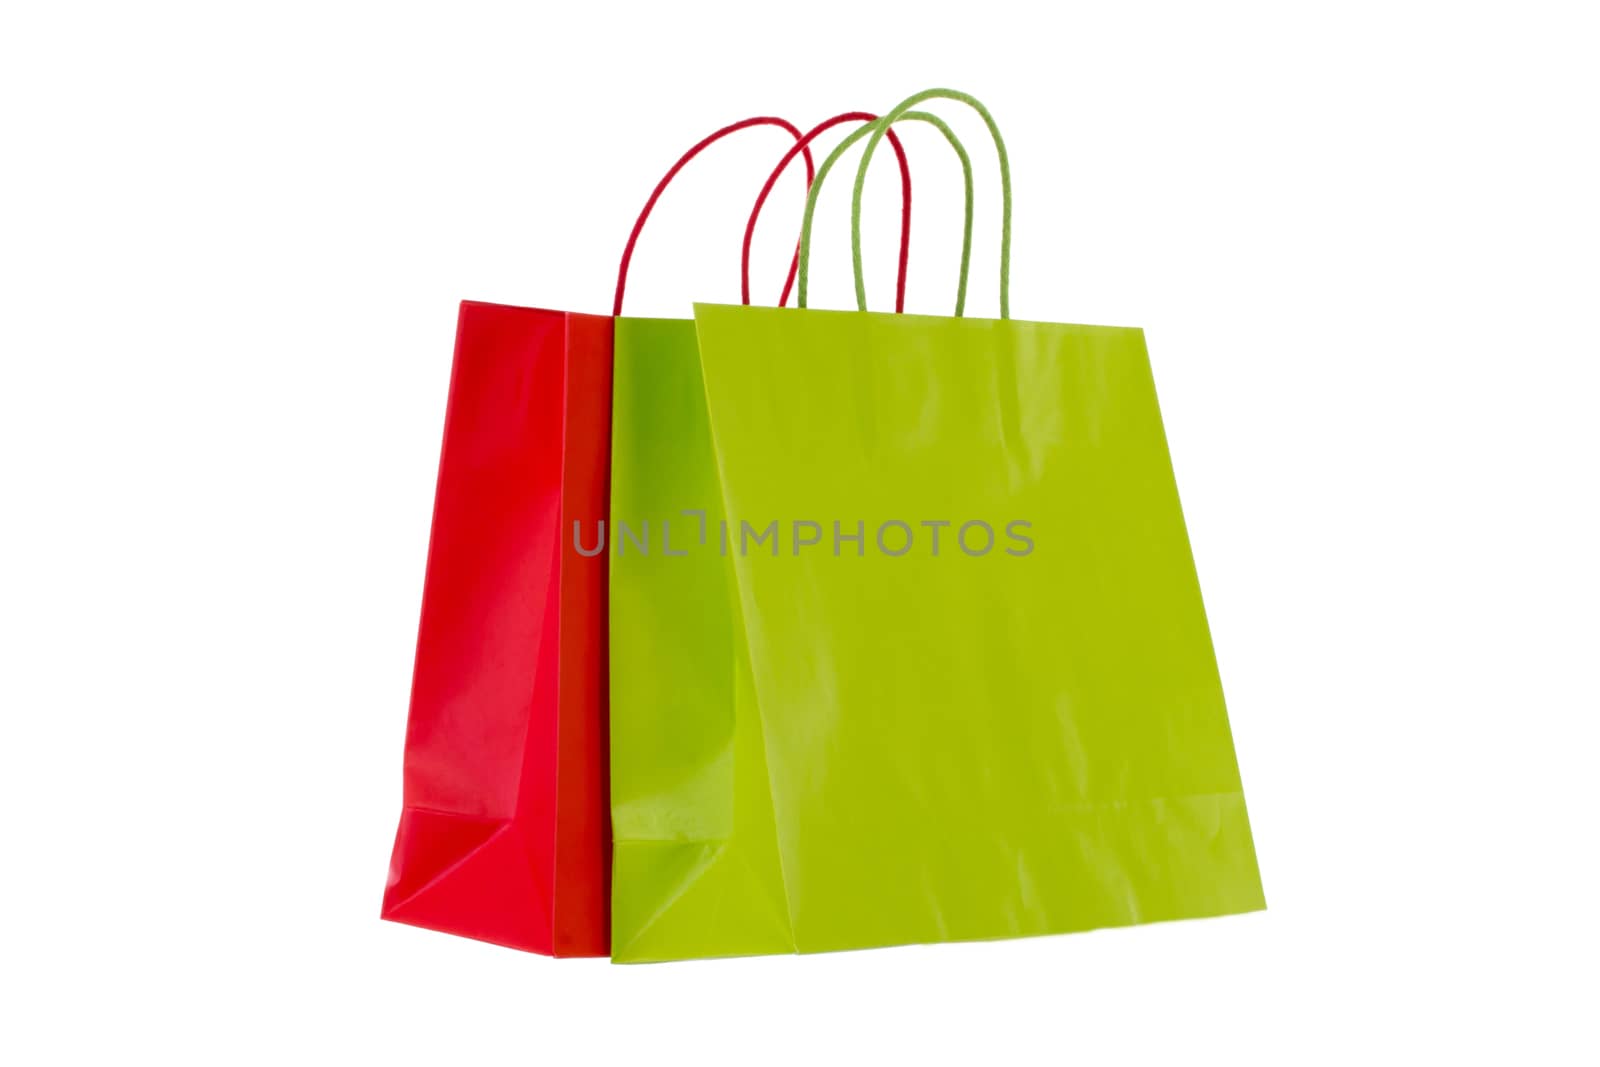 Shopping bags by gwolters